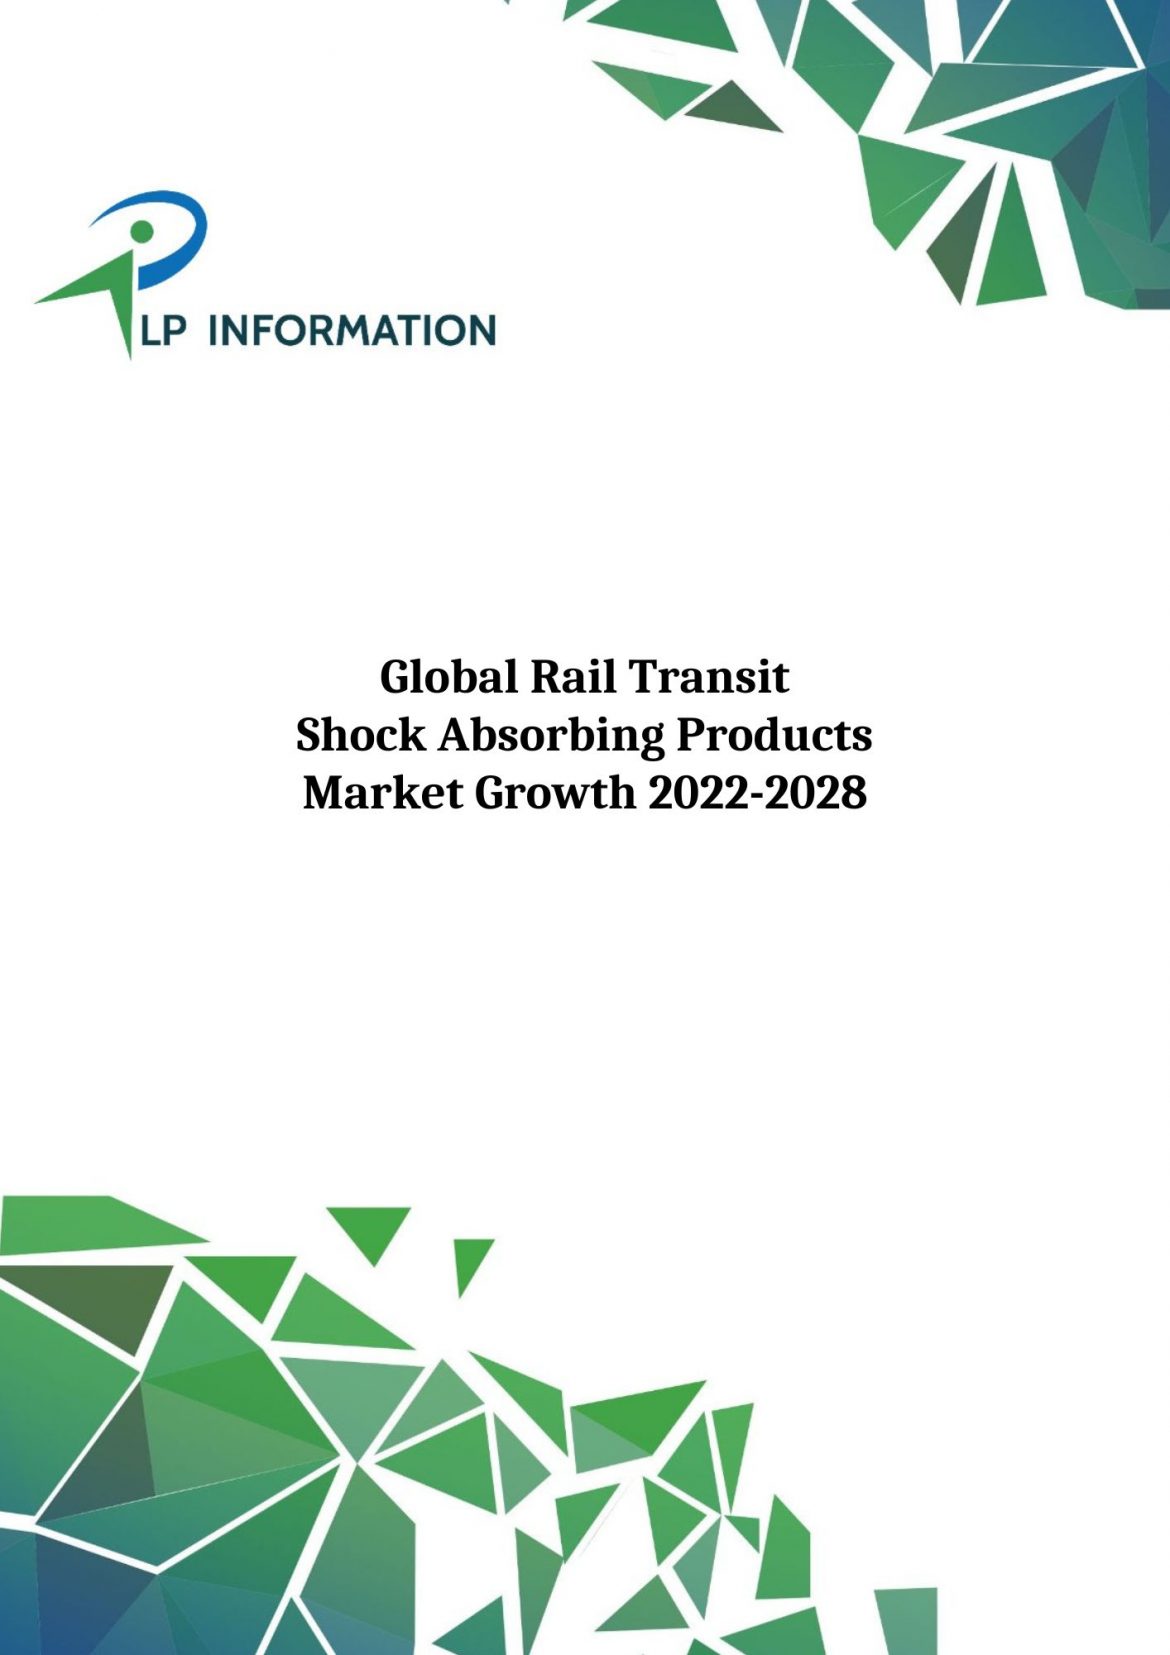 Global Rail Transit Shock Absorbing Products Market Growth 2022-2028